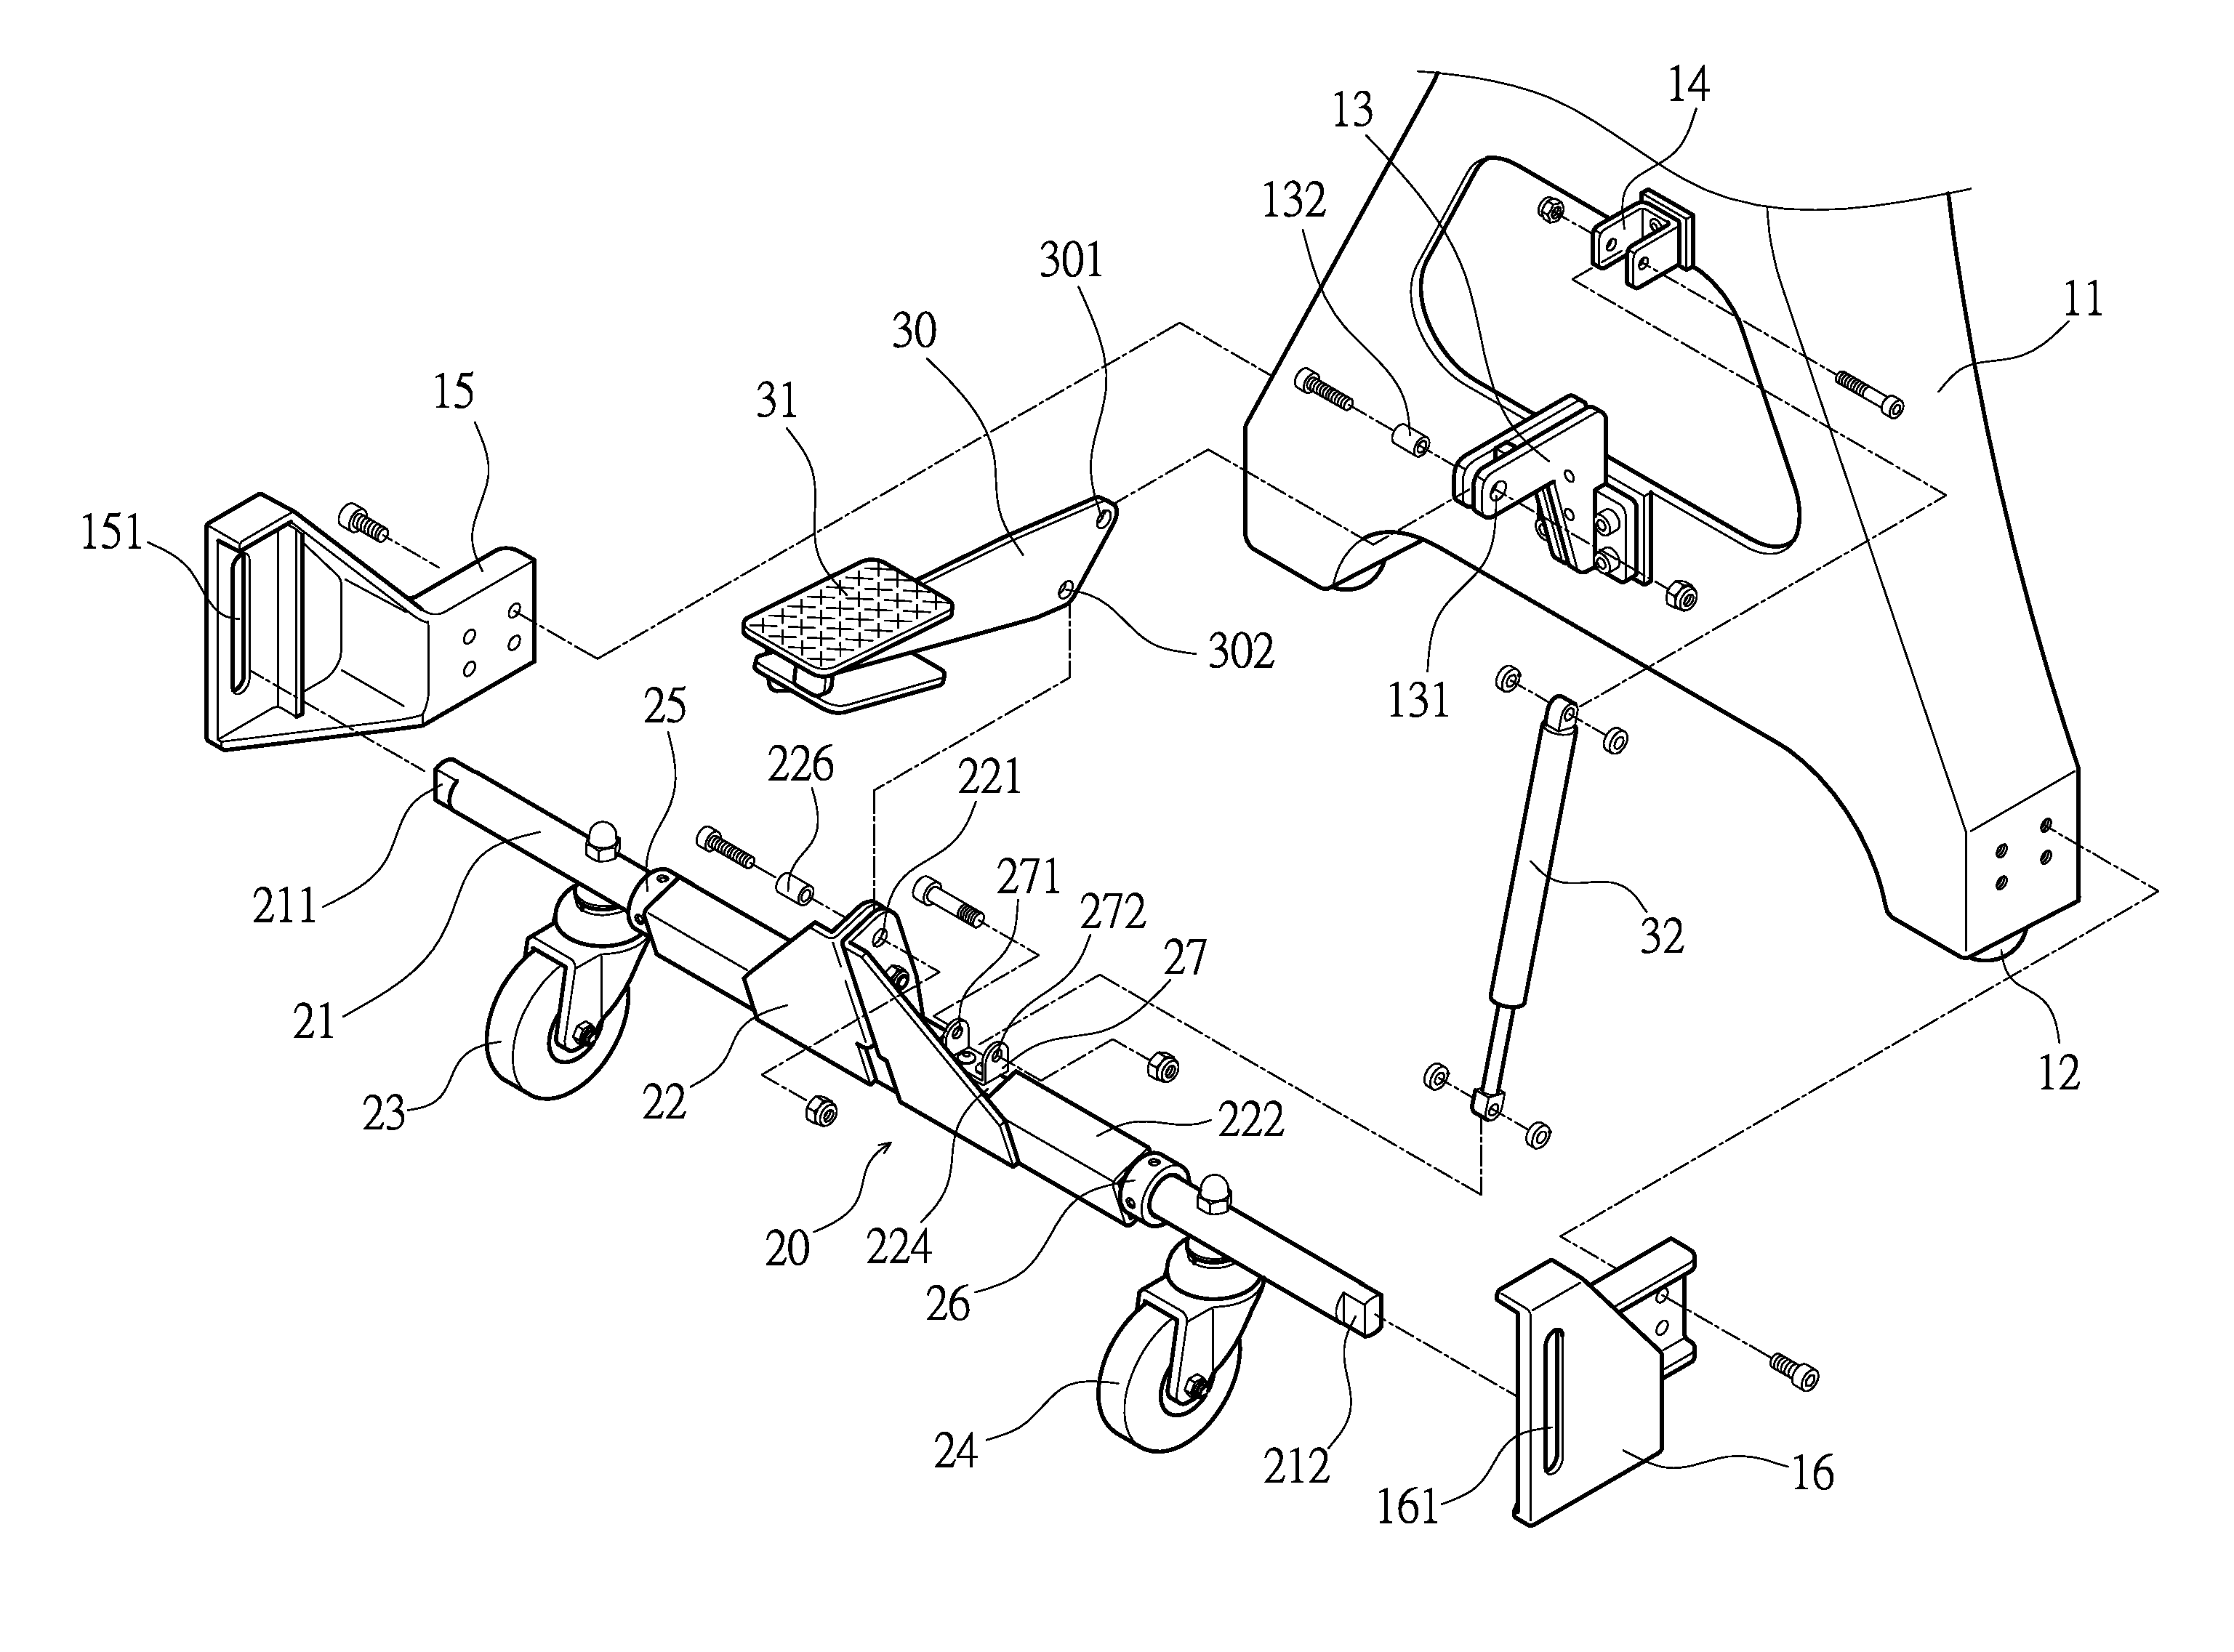 Movement auxiliary device for machine stand